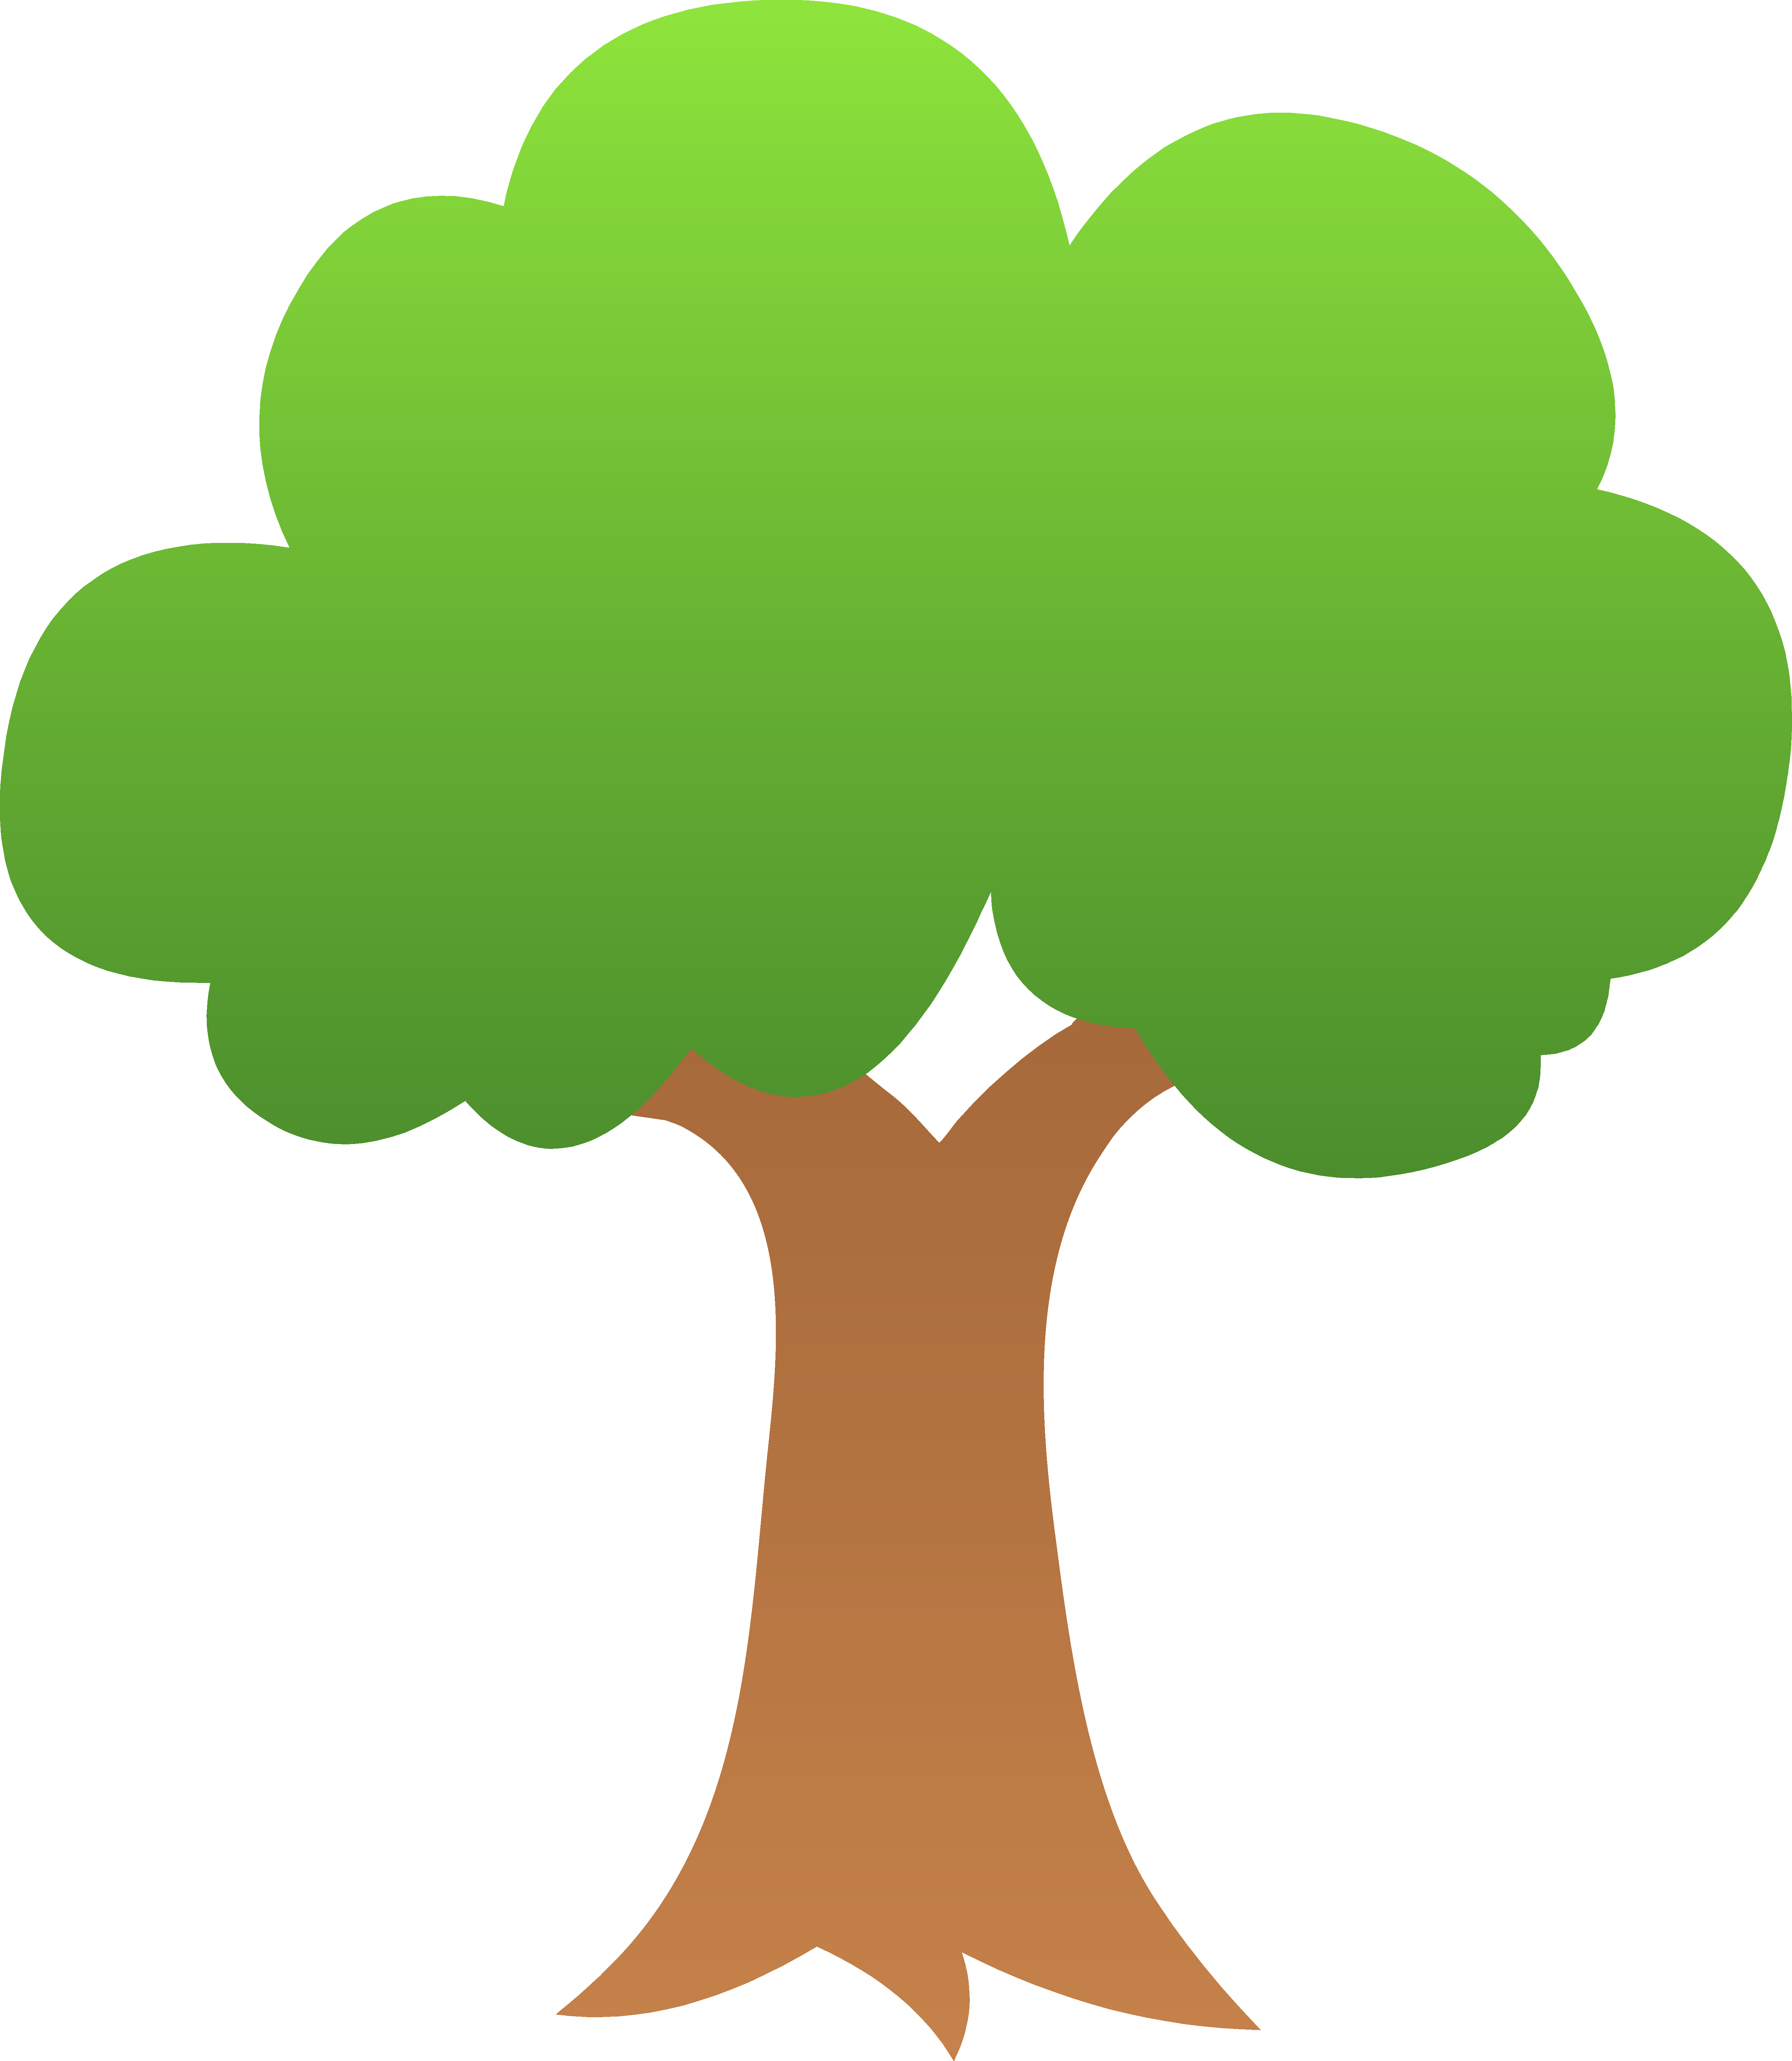 tree clipart - Tree Images Clip Art